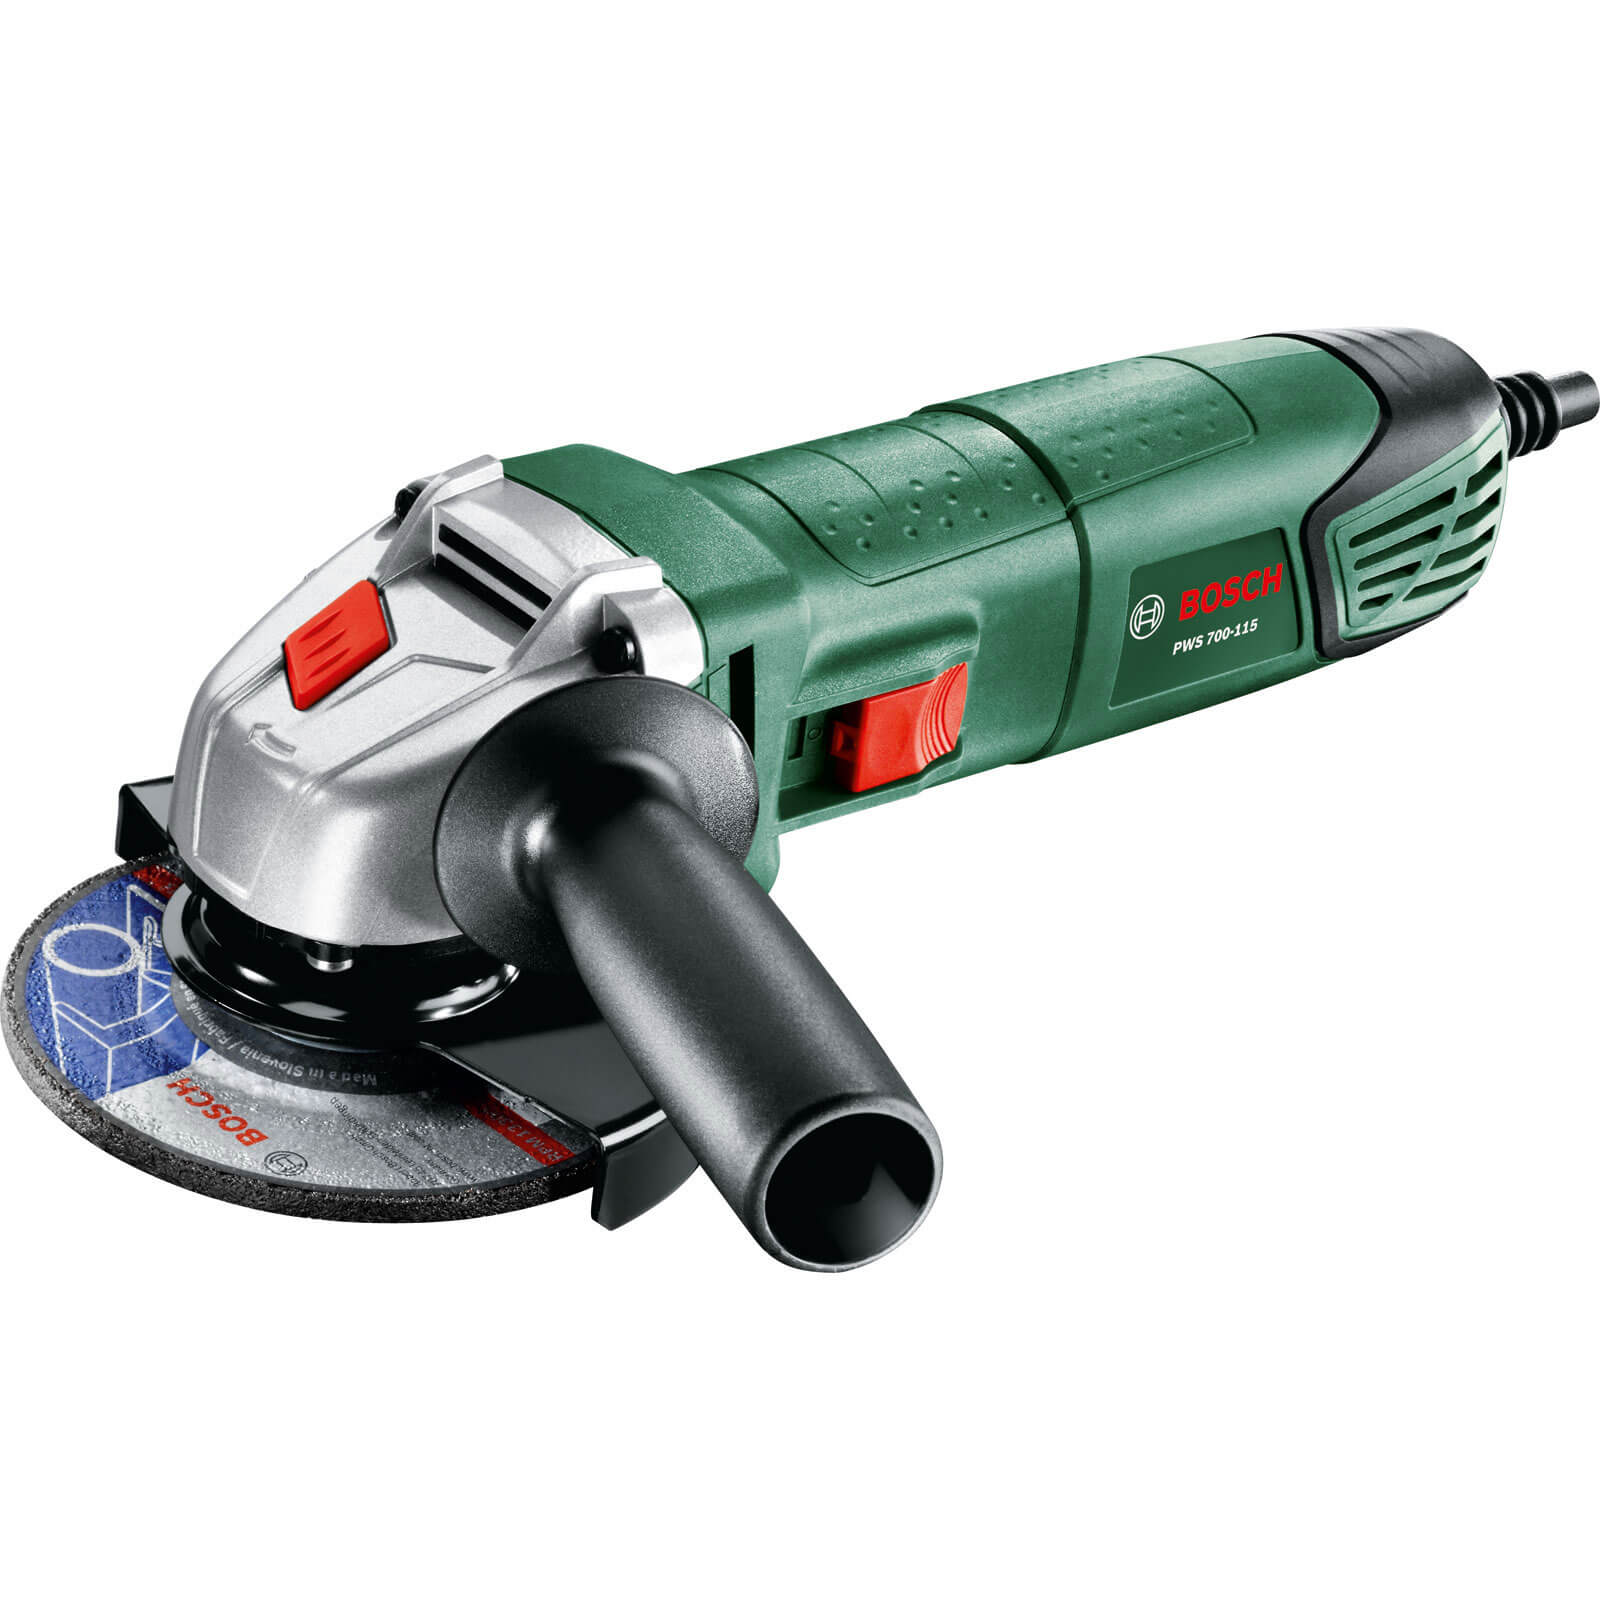 Bosch PWS 700-115 Electric Angle Grinder 115mm / 4.5" Disc 701w 240v